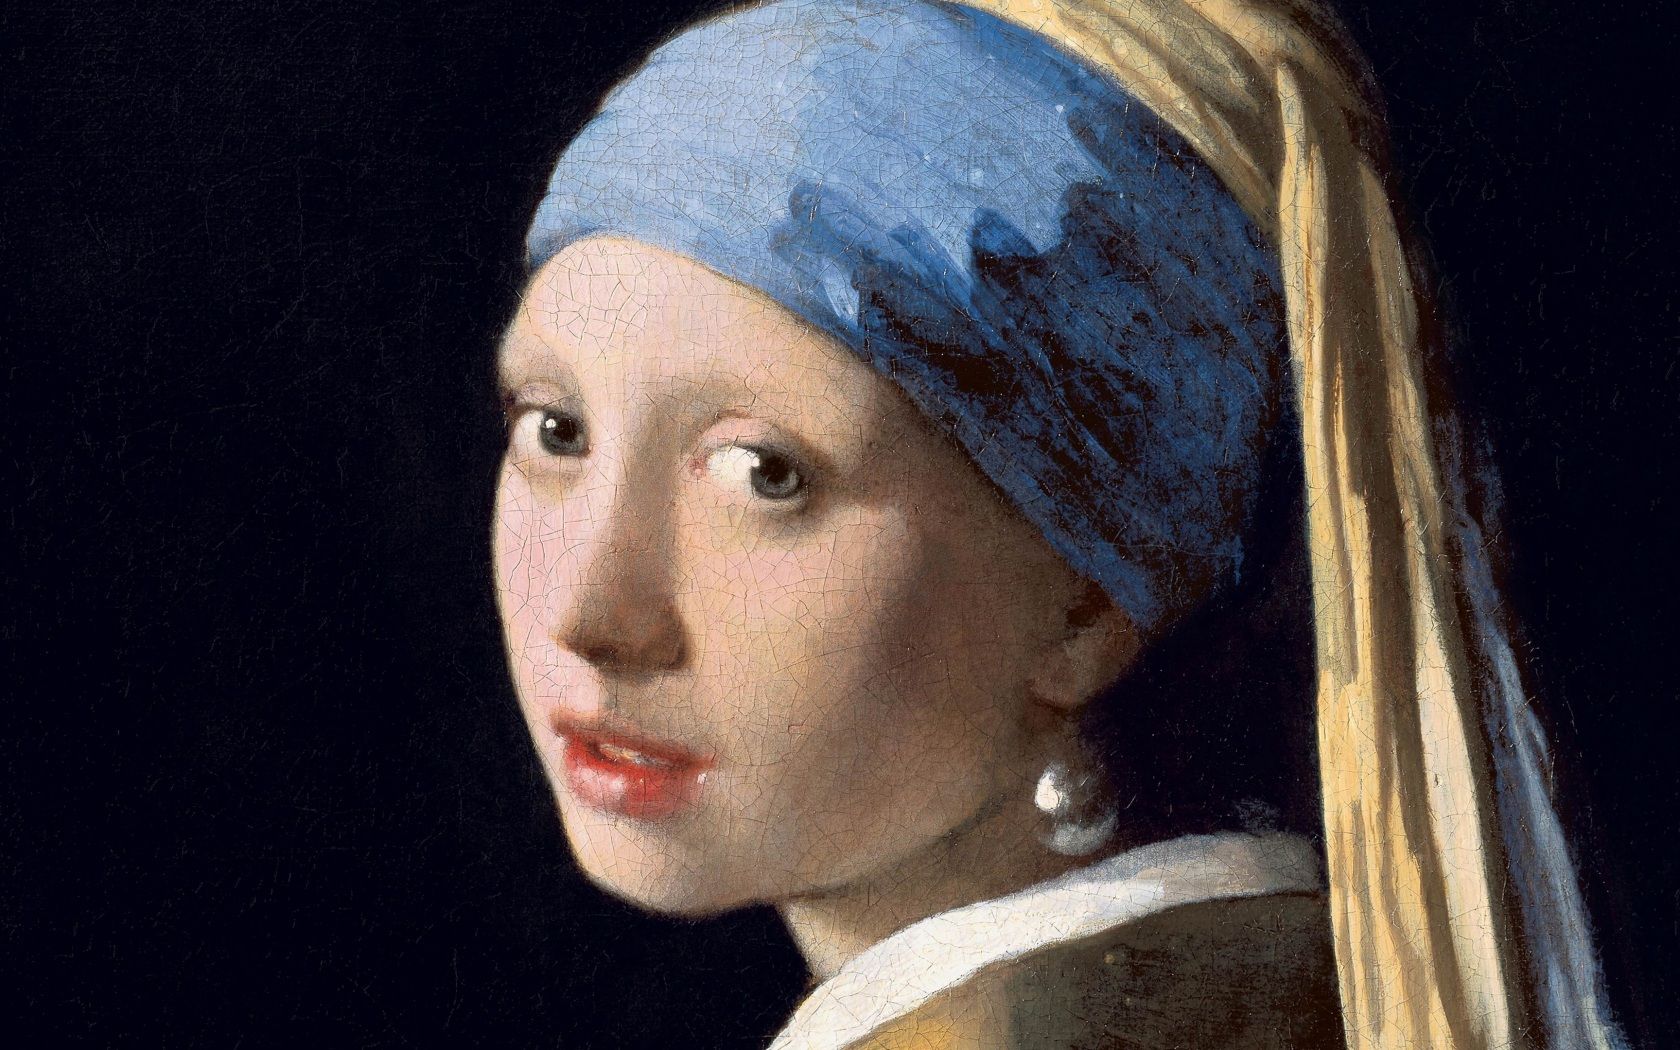 Wallpaper 4k johannes vermeer, girl with a pearl earring, oil, canvas, art 4k girl with a pearl earring, johannes vermeer, oil